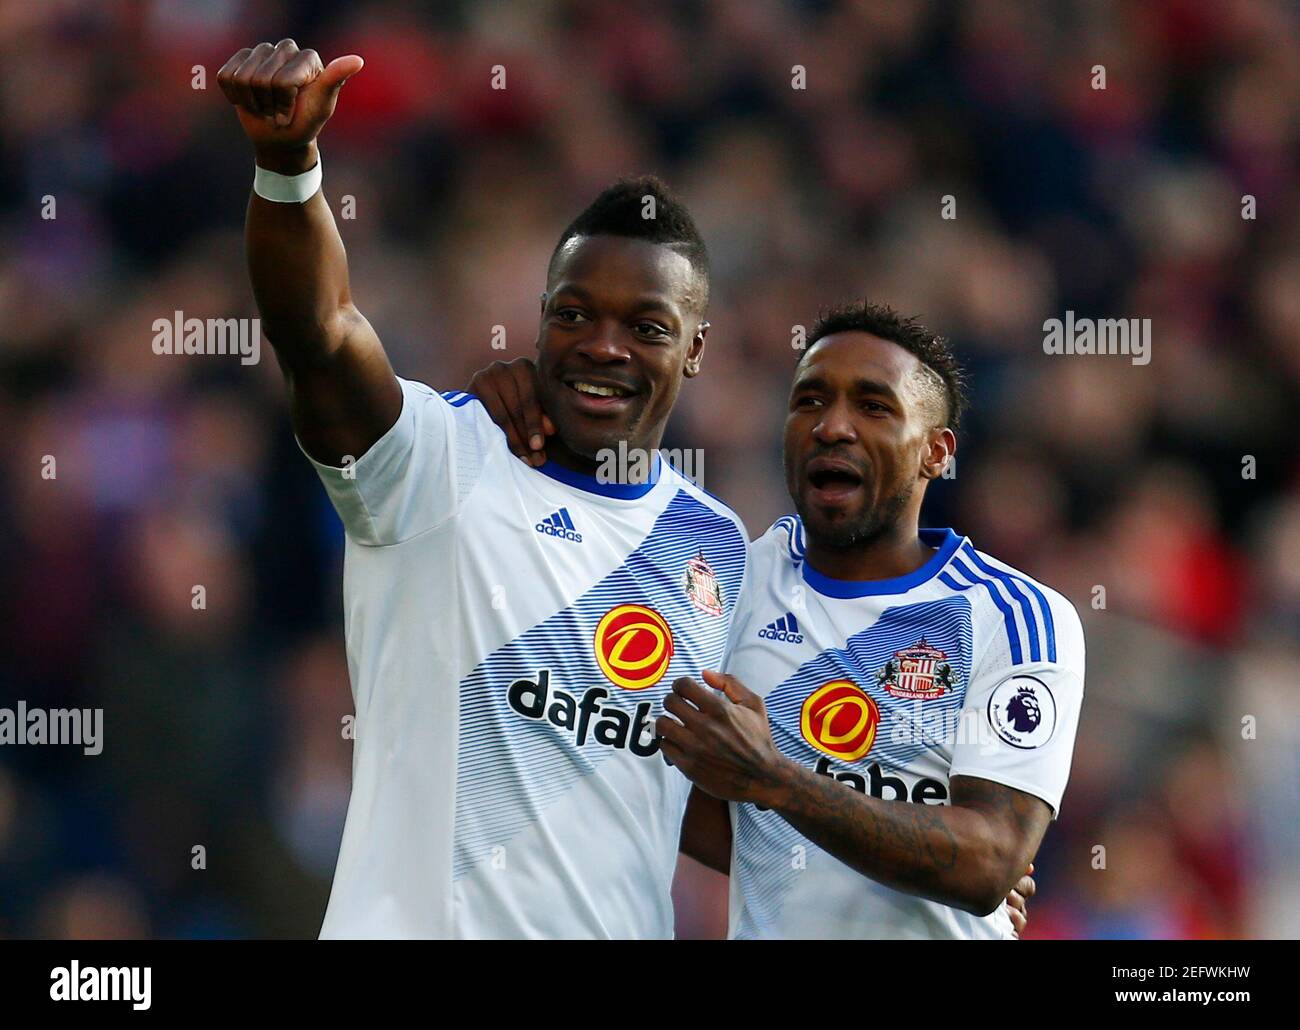 Britain Football Soccer - Crystal Palace v Sunderland - Premier League - Selhurst Park - 4/2/17 Sunderland's Lamine Kone celebrates scoring their first goal with Sunderland's Jermain Defoe  Reuters / Andrew Winning Livepic EDITORIAL USE ONLY. No use with unauthorized audio, video, data, fixture lists, club/league logos or 'live' services. Online in-match use limited to 45 images, no video emulation. No use in betting, games or single club/league/player publications.  Please contact your account representative for further details. Stock Photo